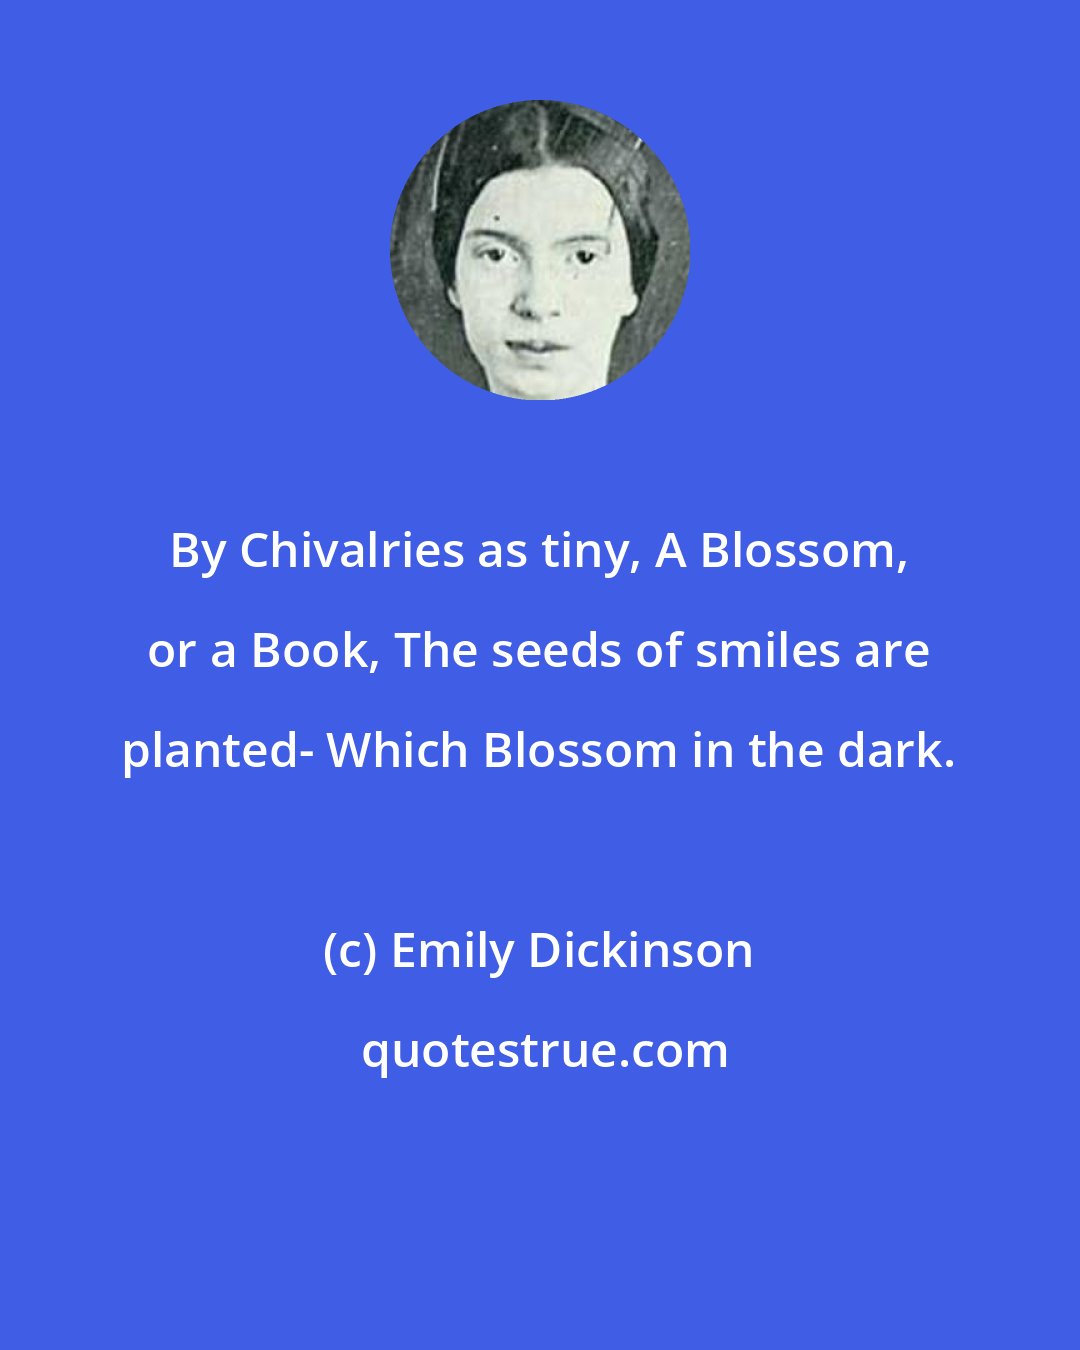 Emily Dickinson: By Chivalries as tiny, A Blossom, or a Book, The seeds of smiles are planted- Which Blossom in the dark.